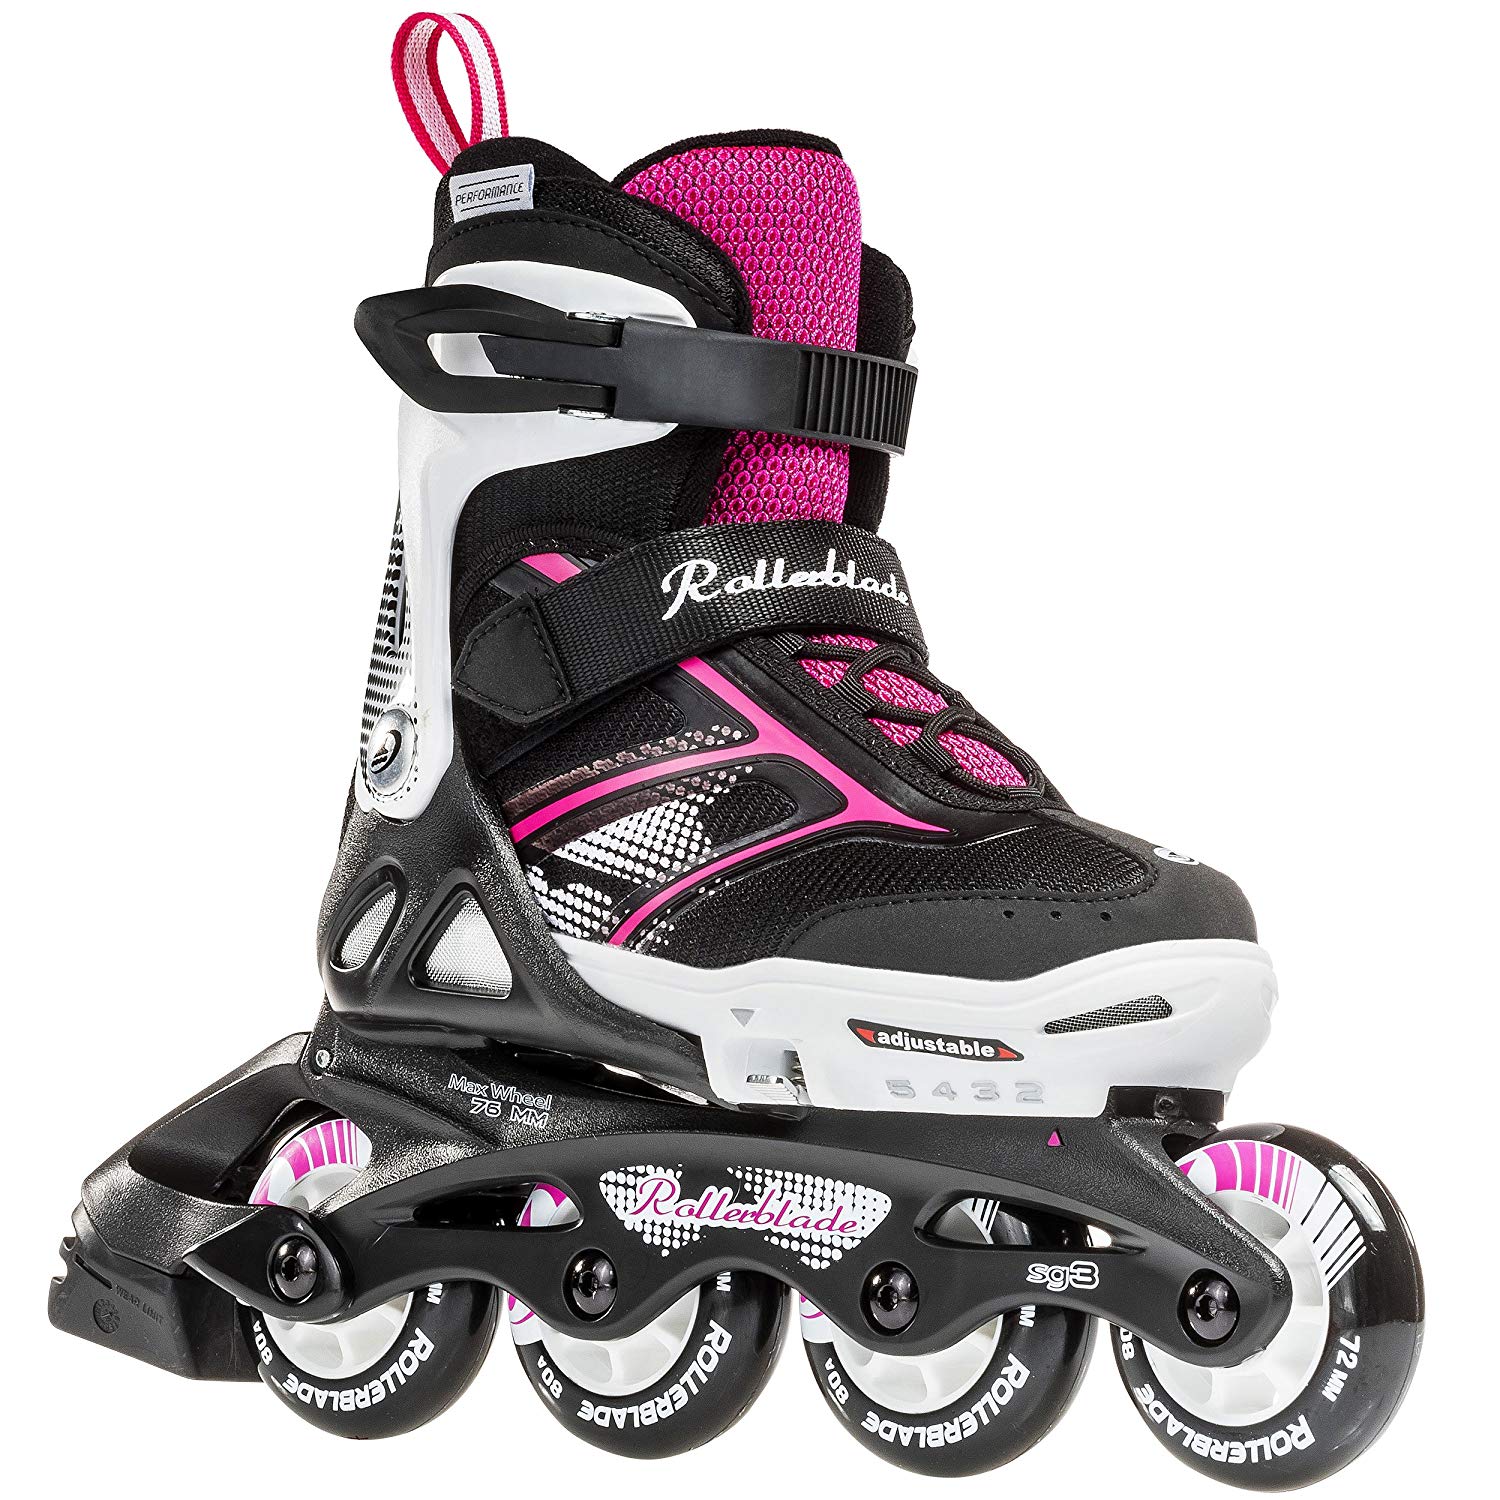 Top 10 Best Rollerblades for Boys in 2021 Reviews Buyer's Guide